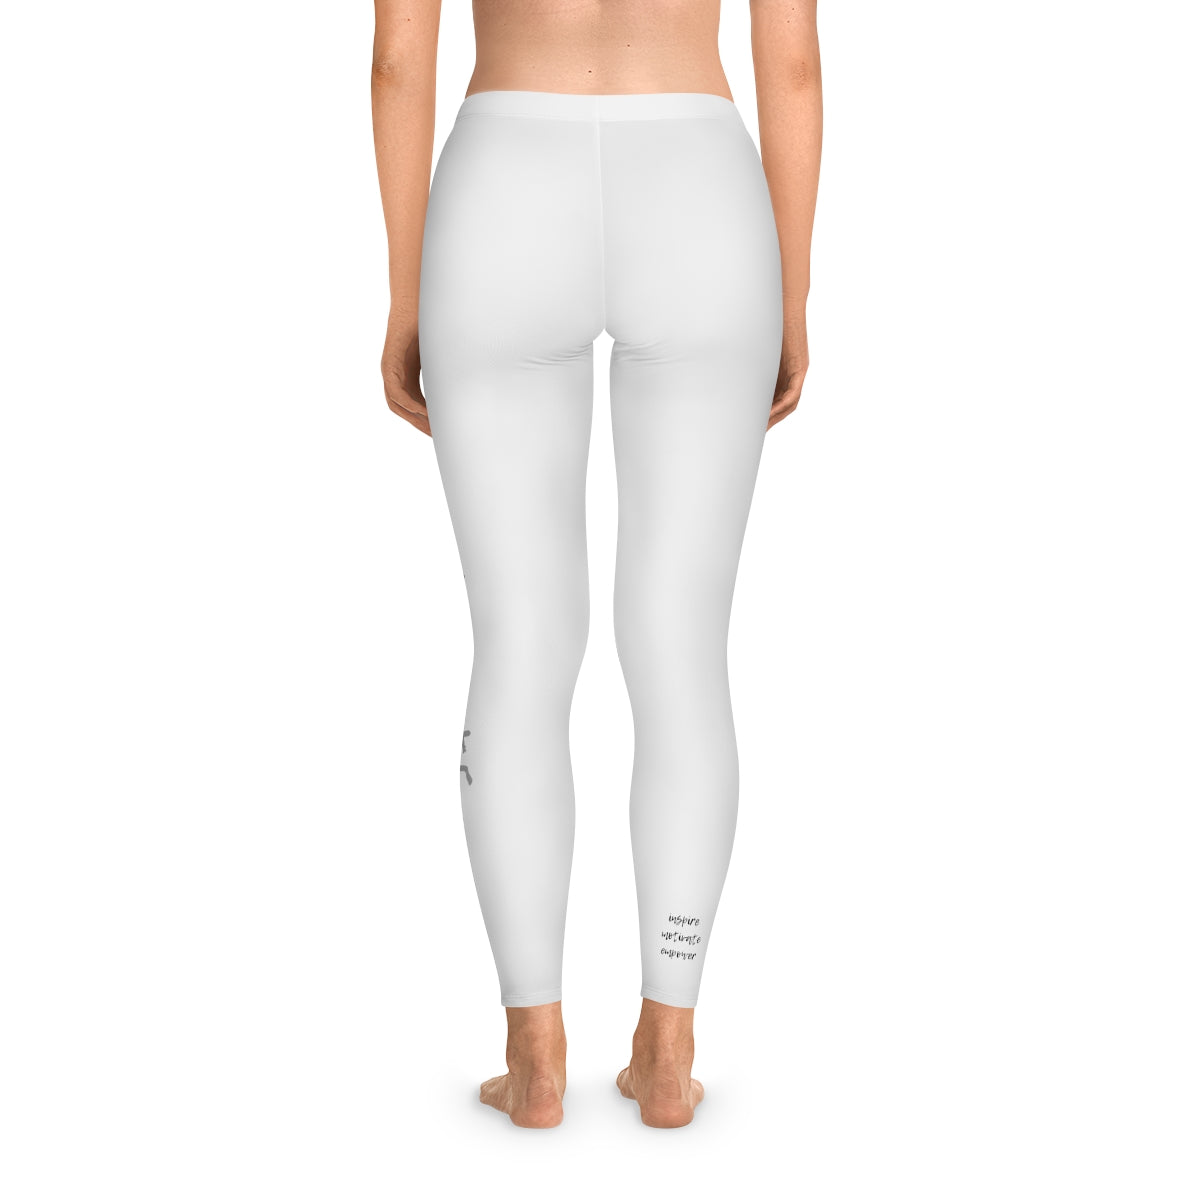 OmE Casual Stretchy Leggings